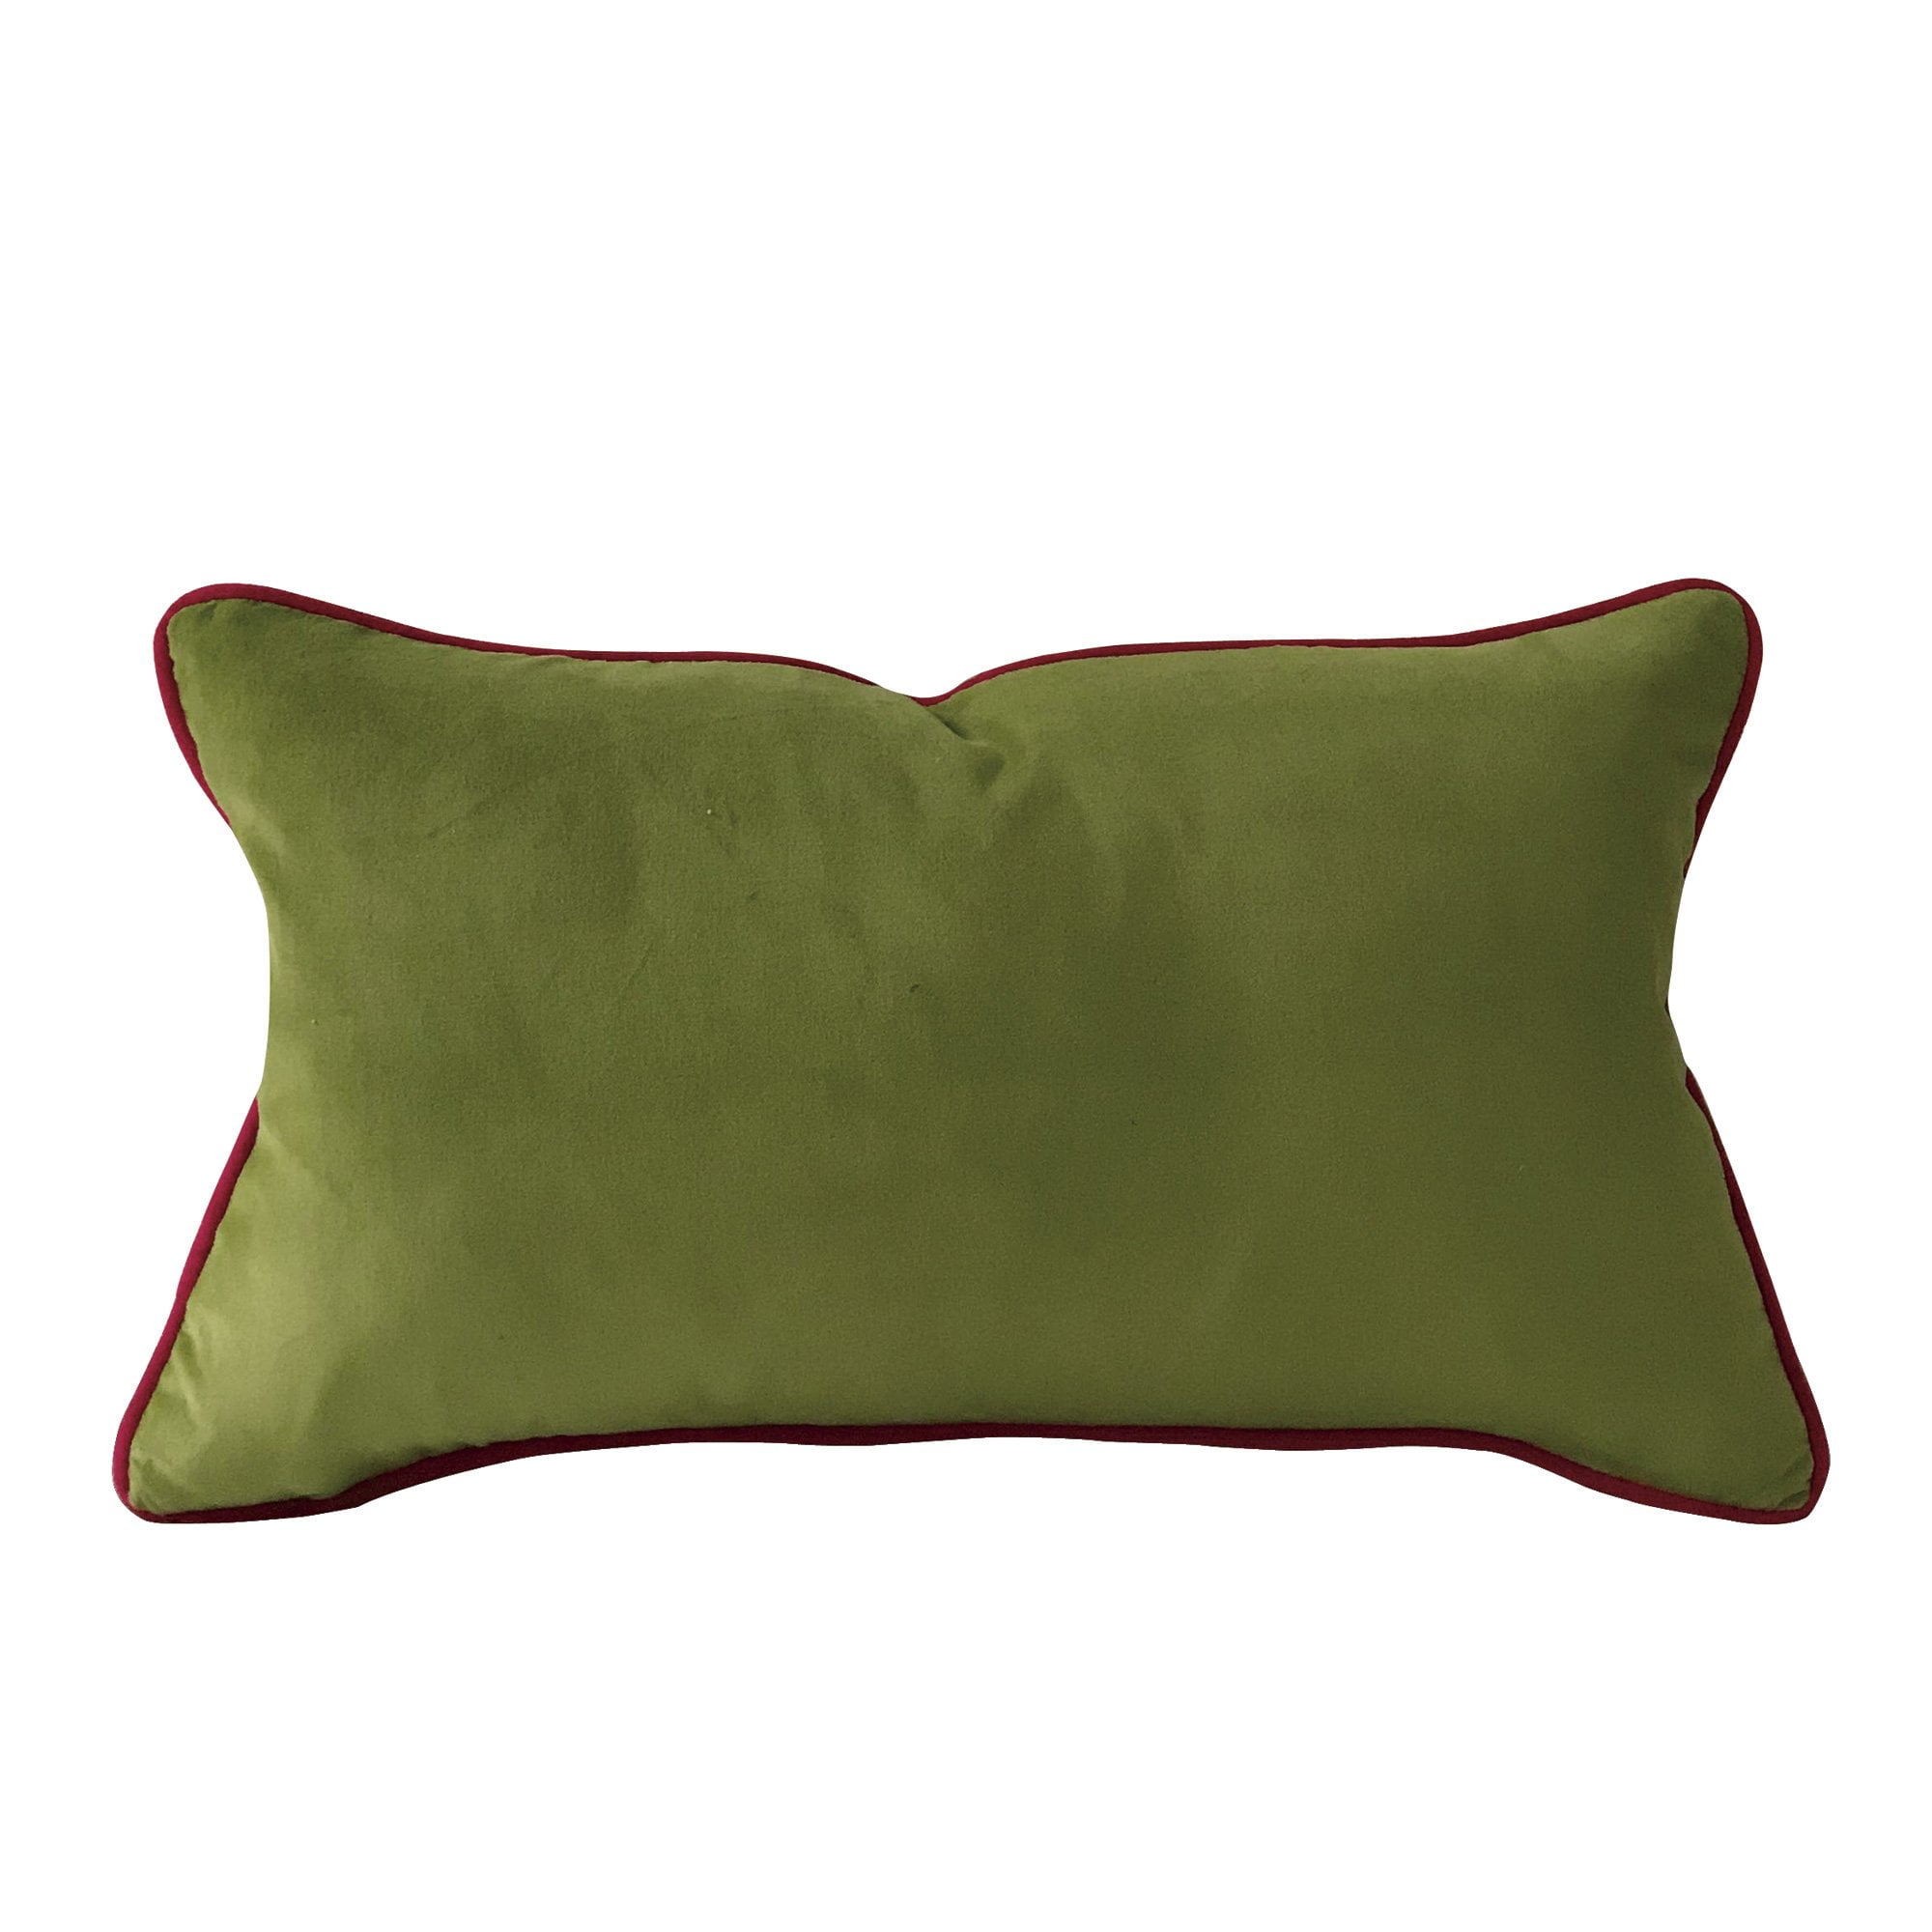 Kufri Rustic Solid Designer Pillow Cover in Olive – Linen + Cloth